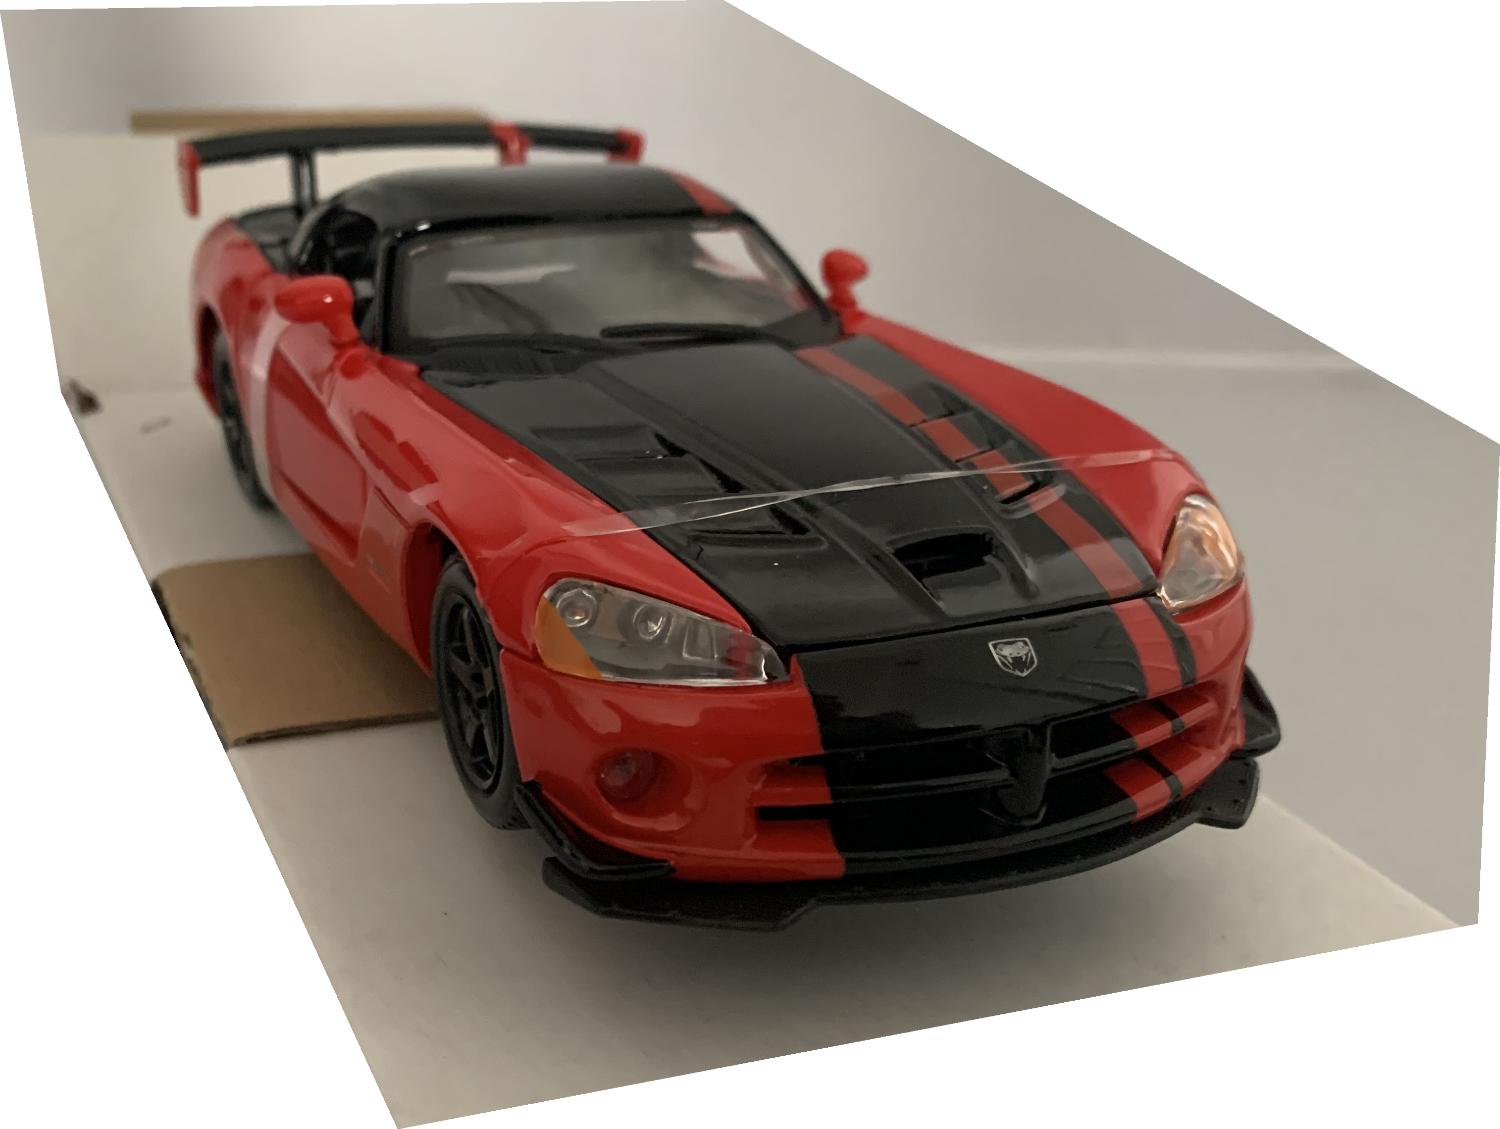 An excellent reproduction of the Dodge Viper SRT 10 ACR with high level of detail throughout, all authentically recreated.